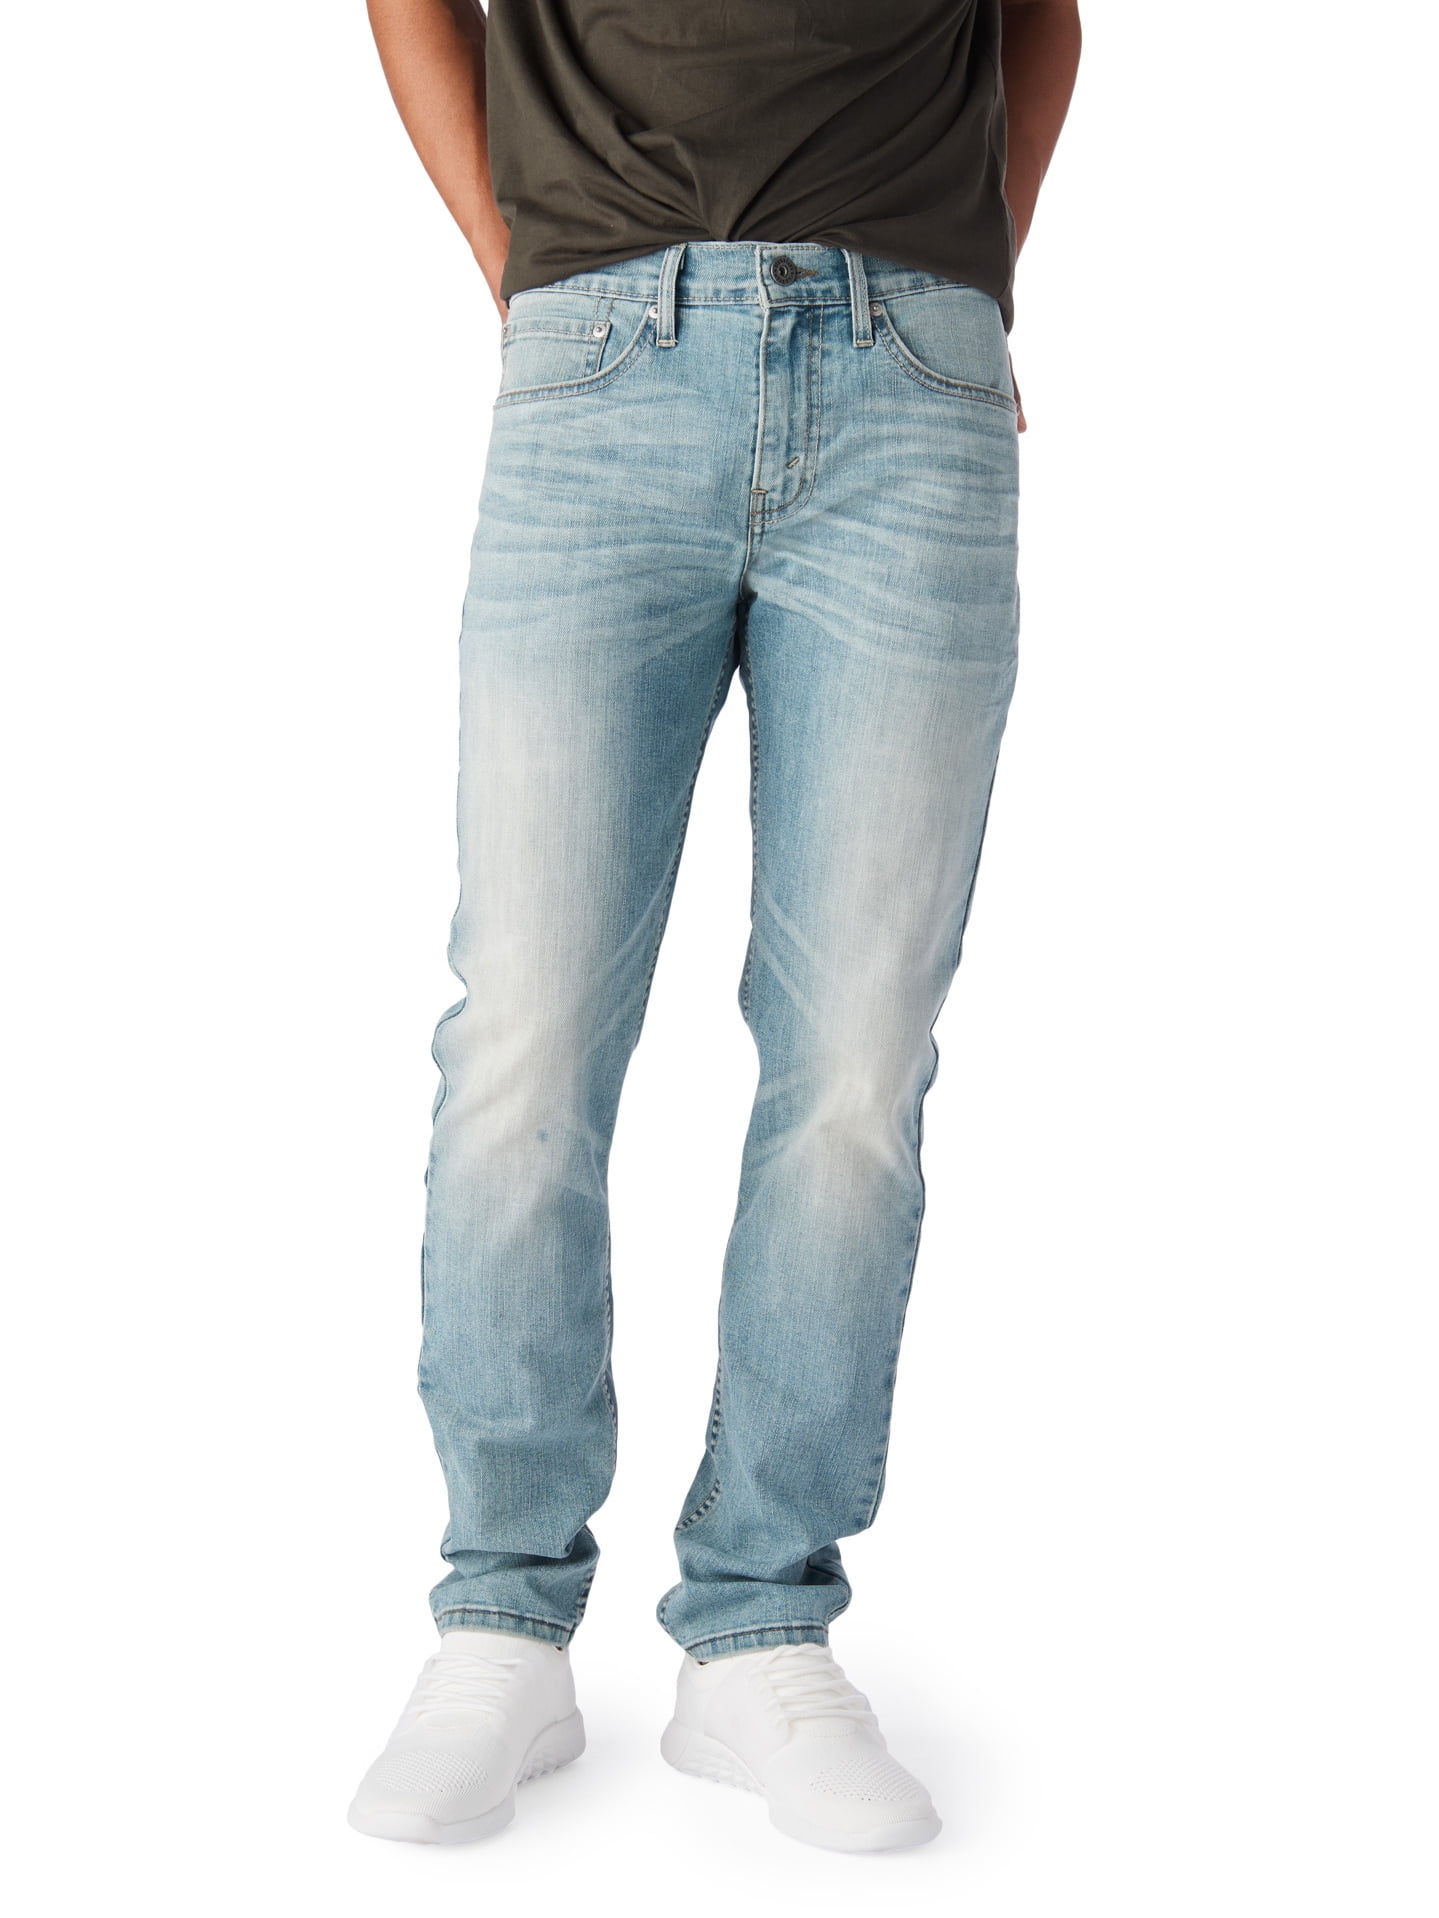 Signature by Levi Strauss & Co. Men's Skinny Fit Jeans - Walmart.com